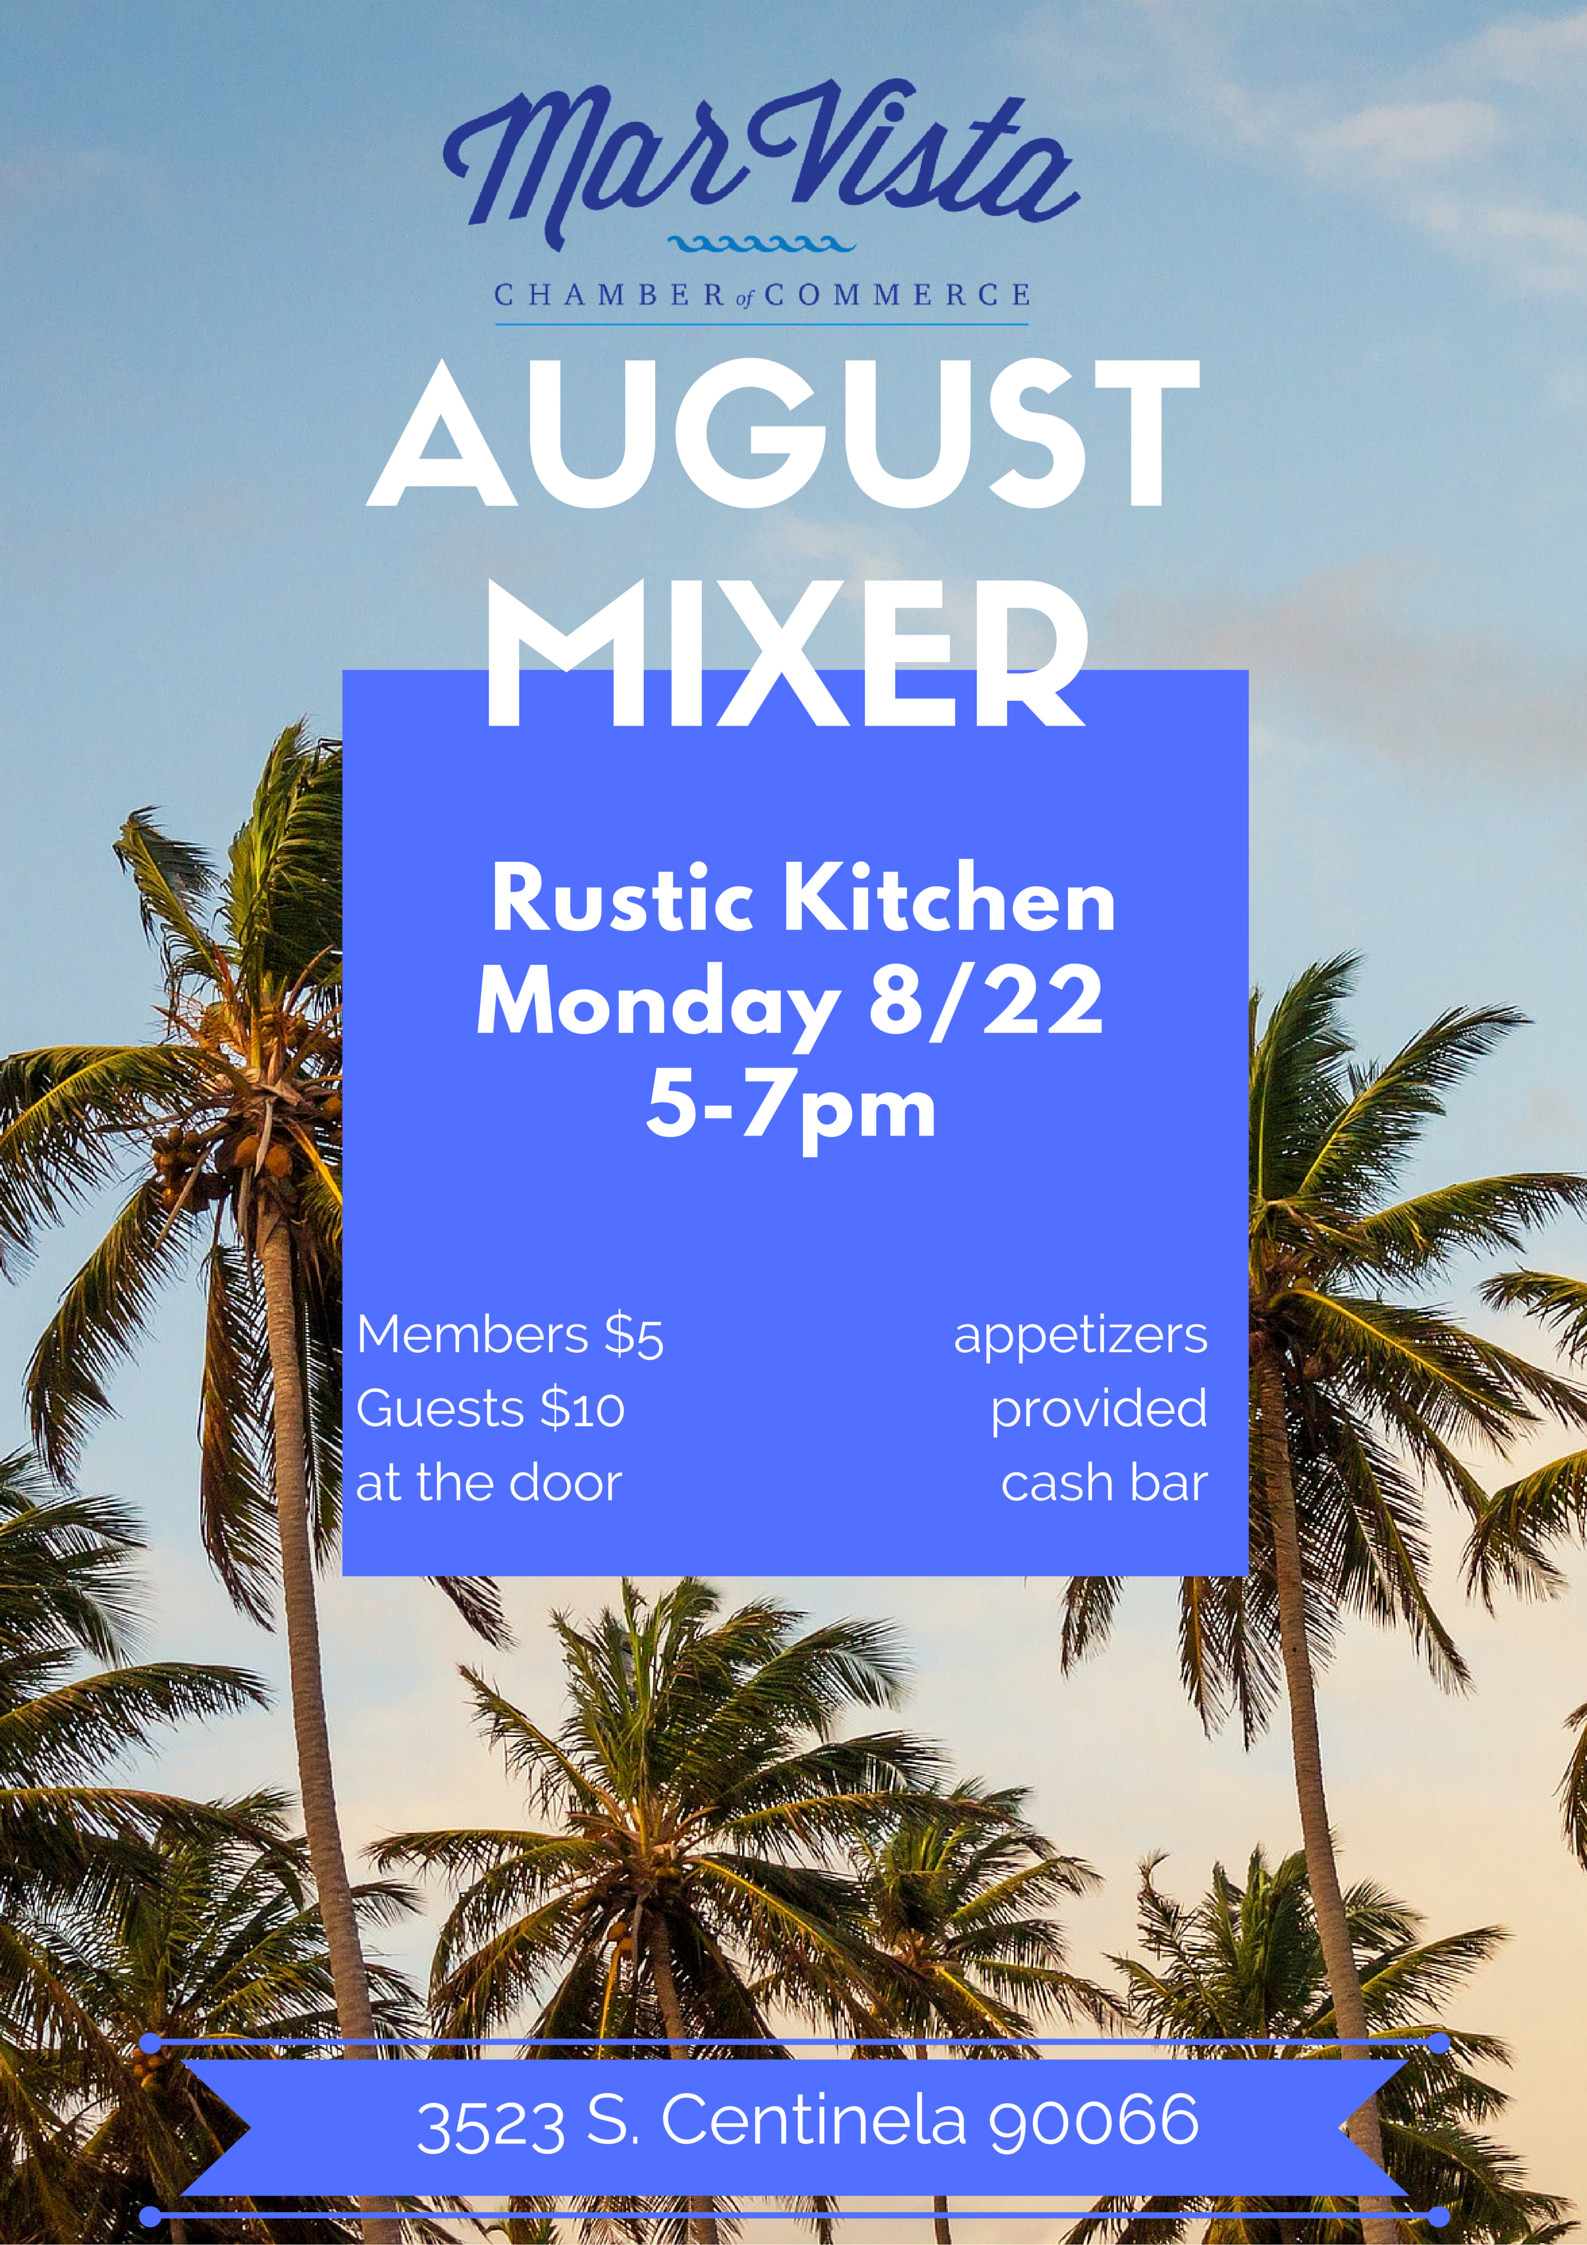 Rustic Kitchen Mar Vista
 August Mixer at Rustic Kitchen Monday August 22nd 5 7pm